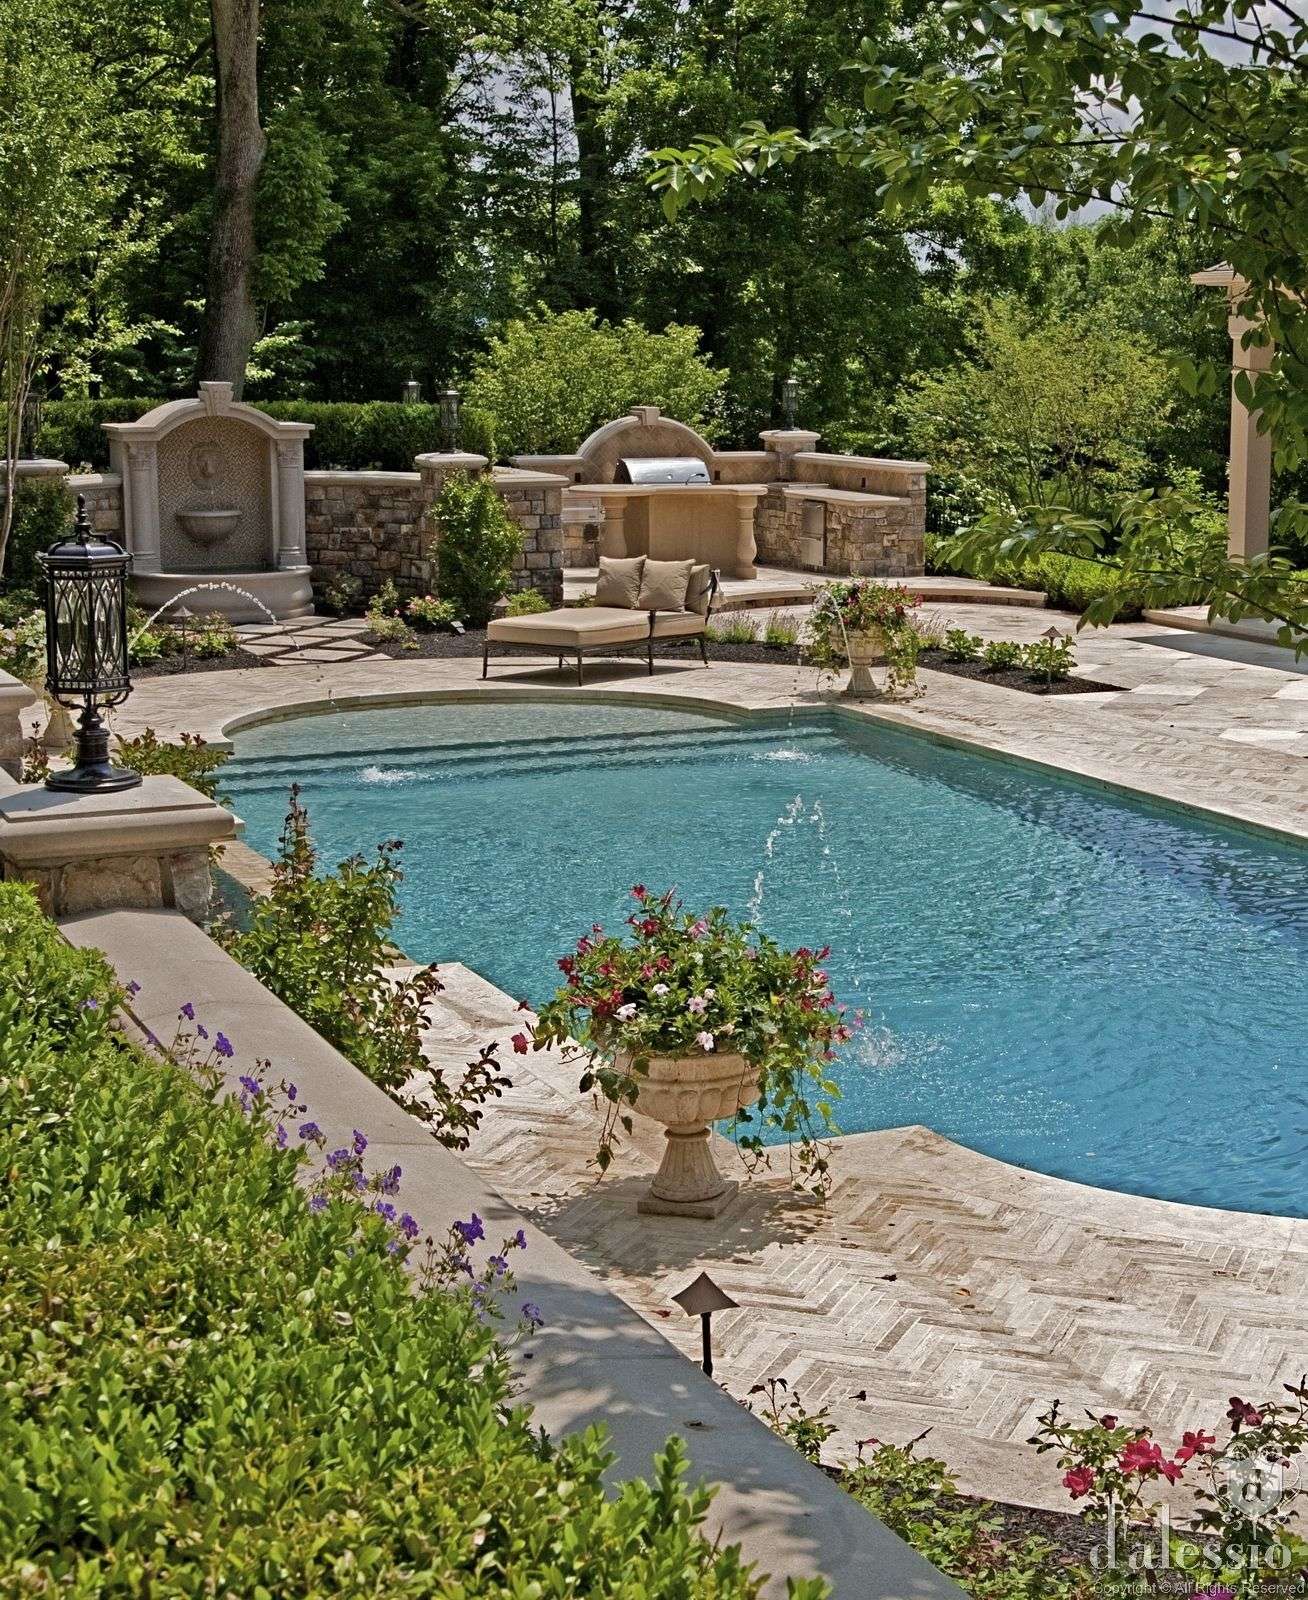 .Pools and water features add so much character to the ...